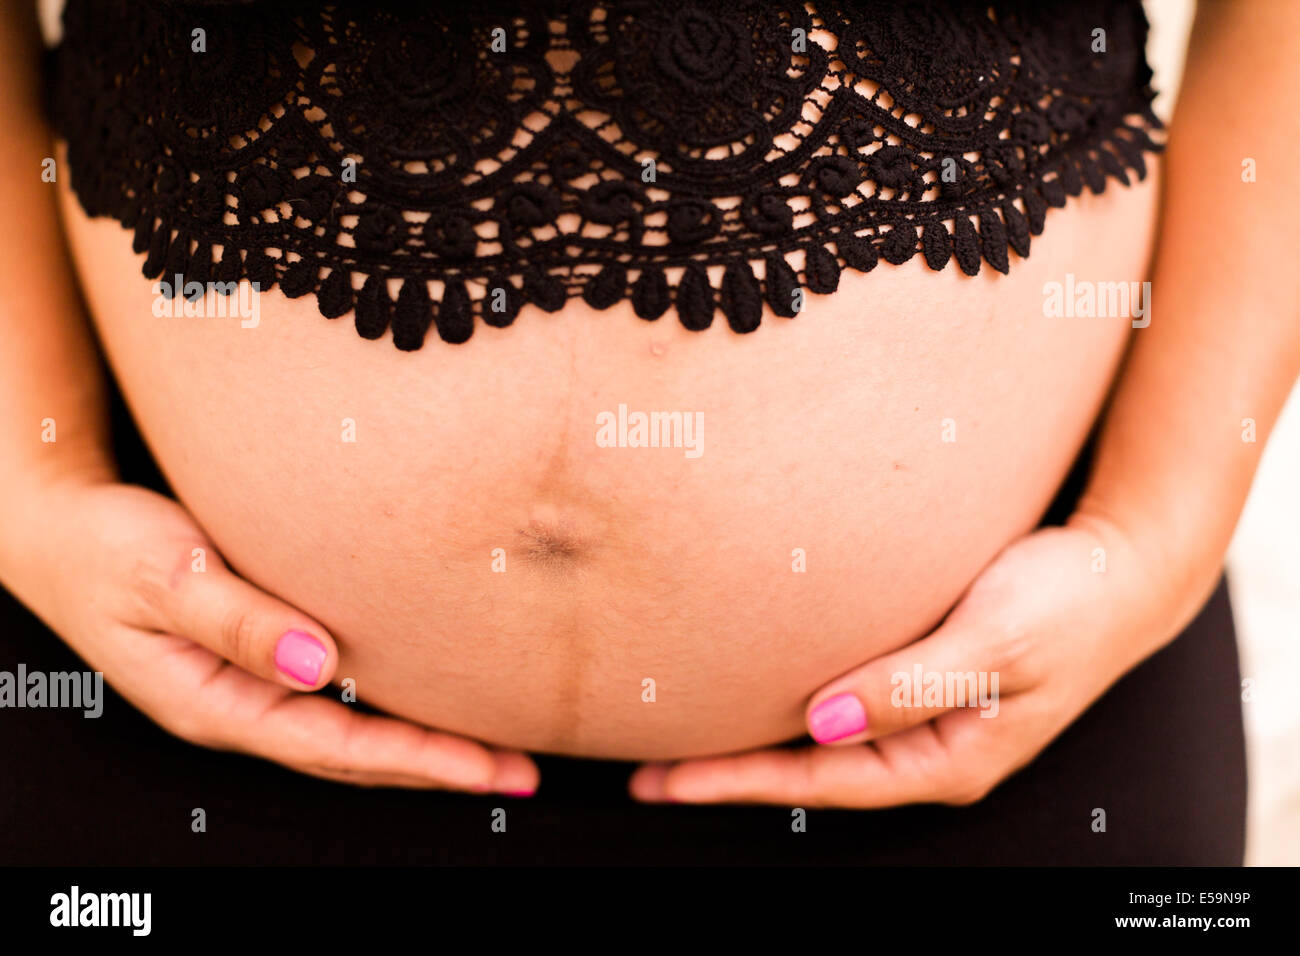 Pregnant young woman on last month of pregnancy. Stock Photo